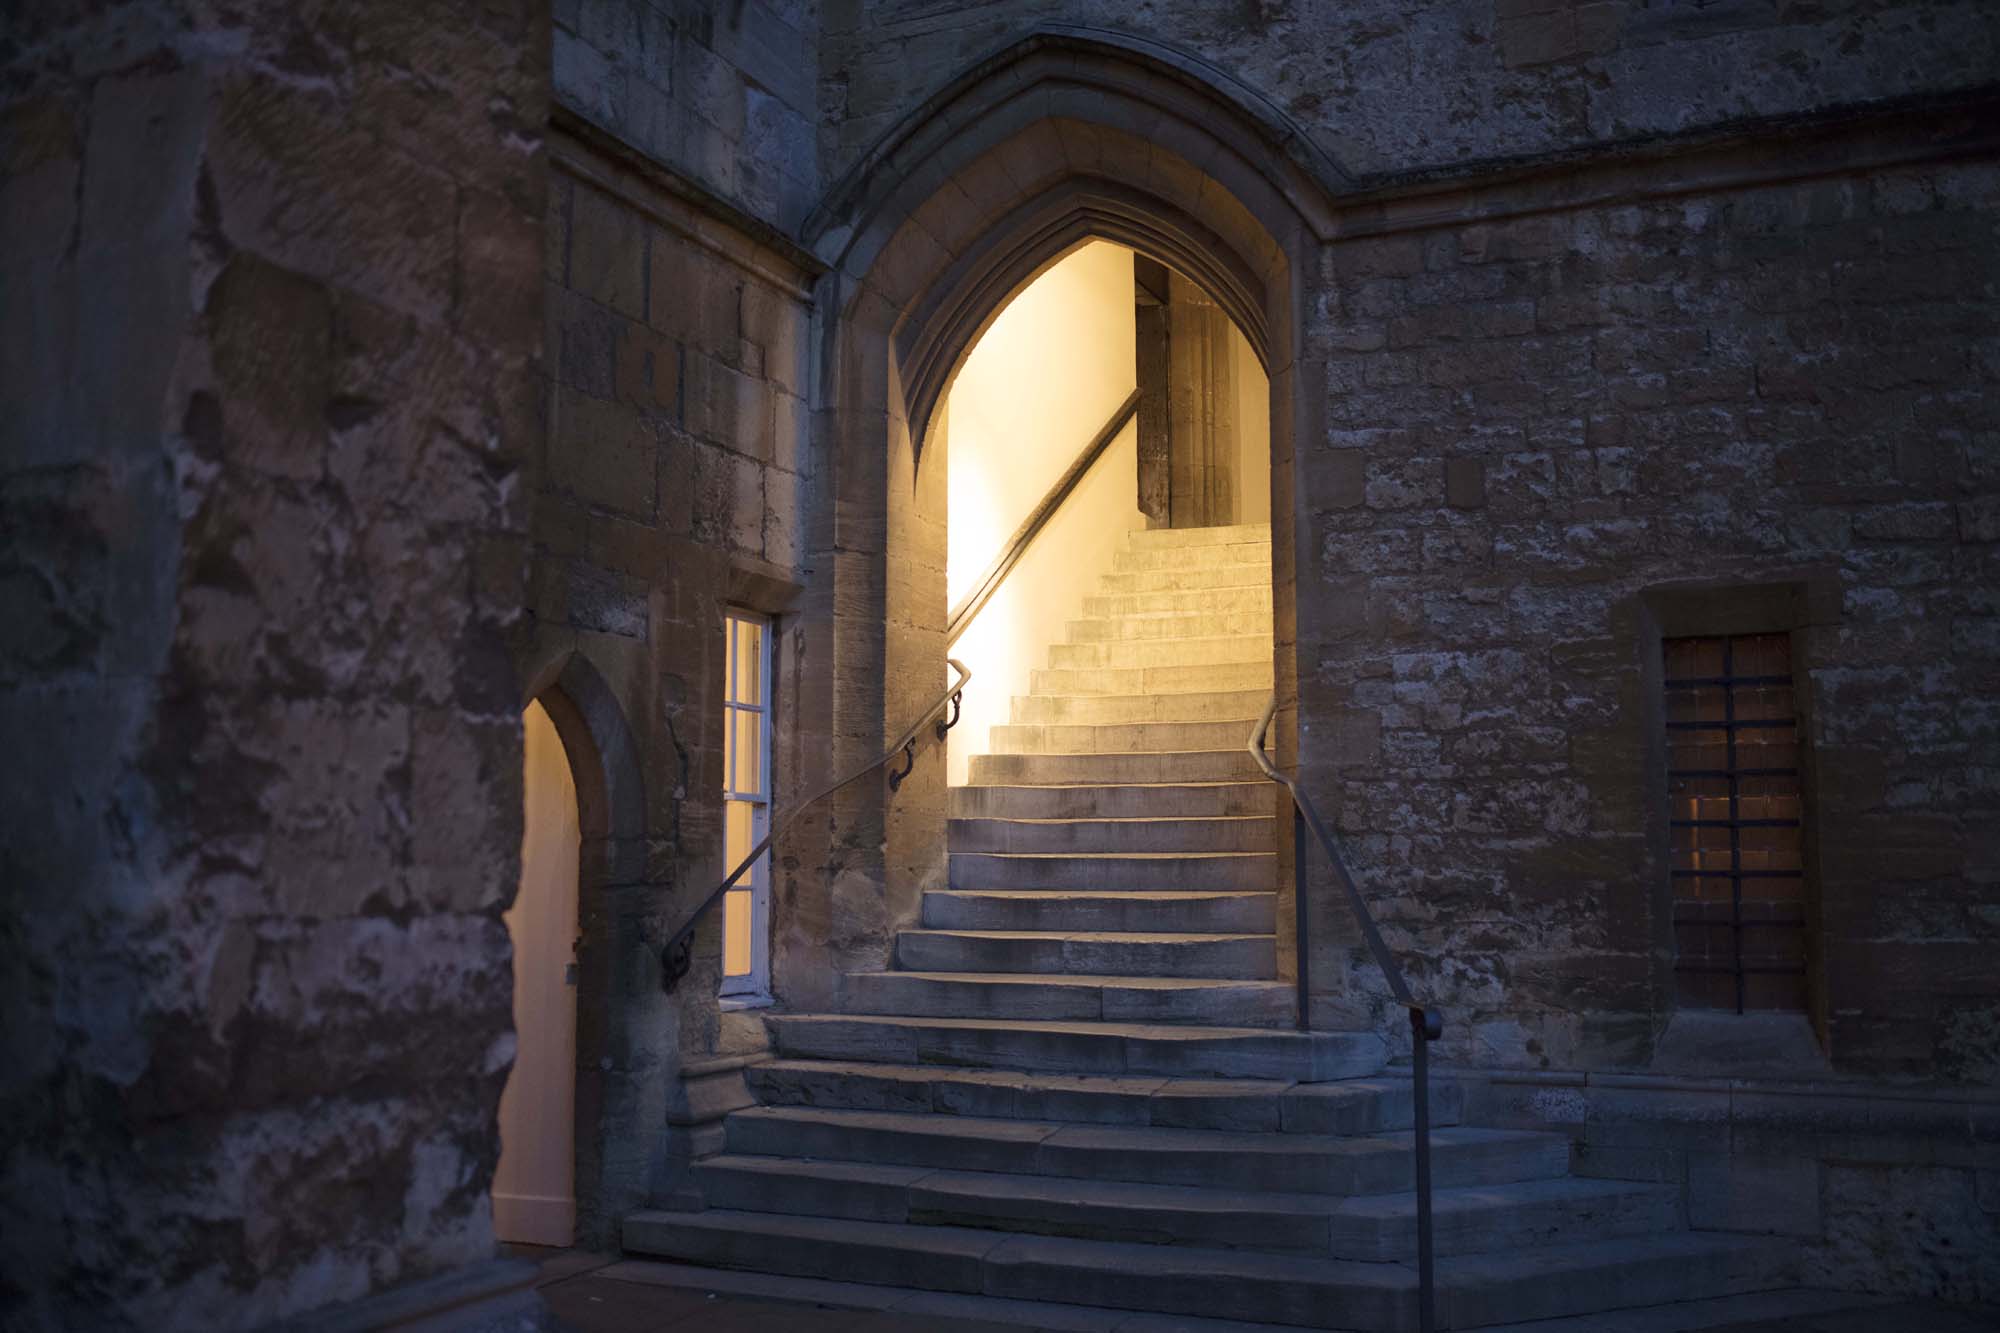 Dining Hall Staircase at Dusk